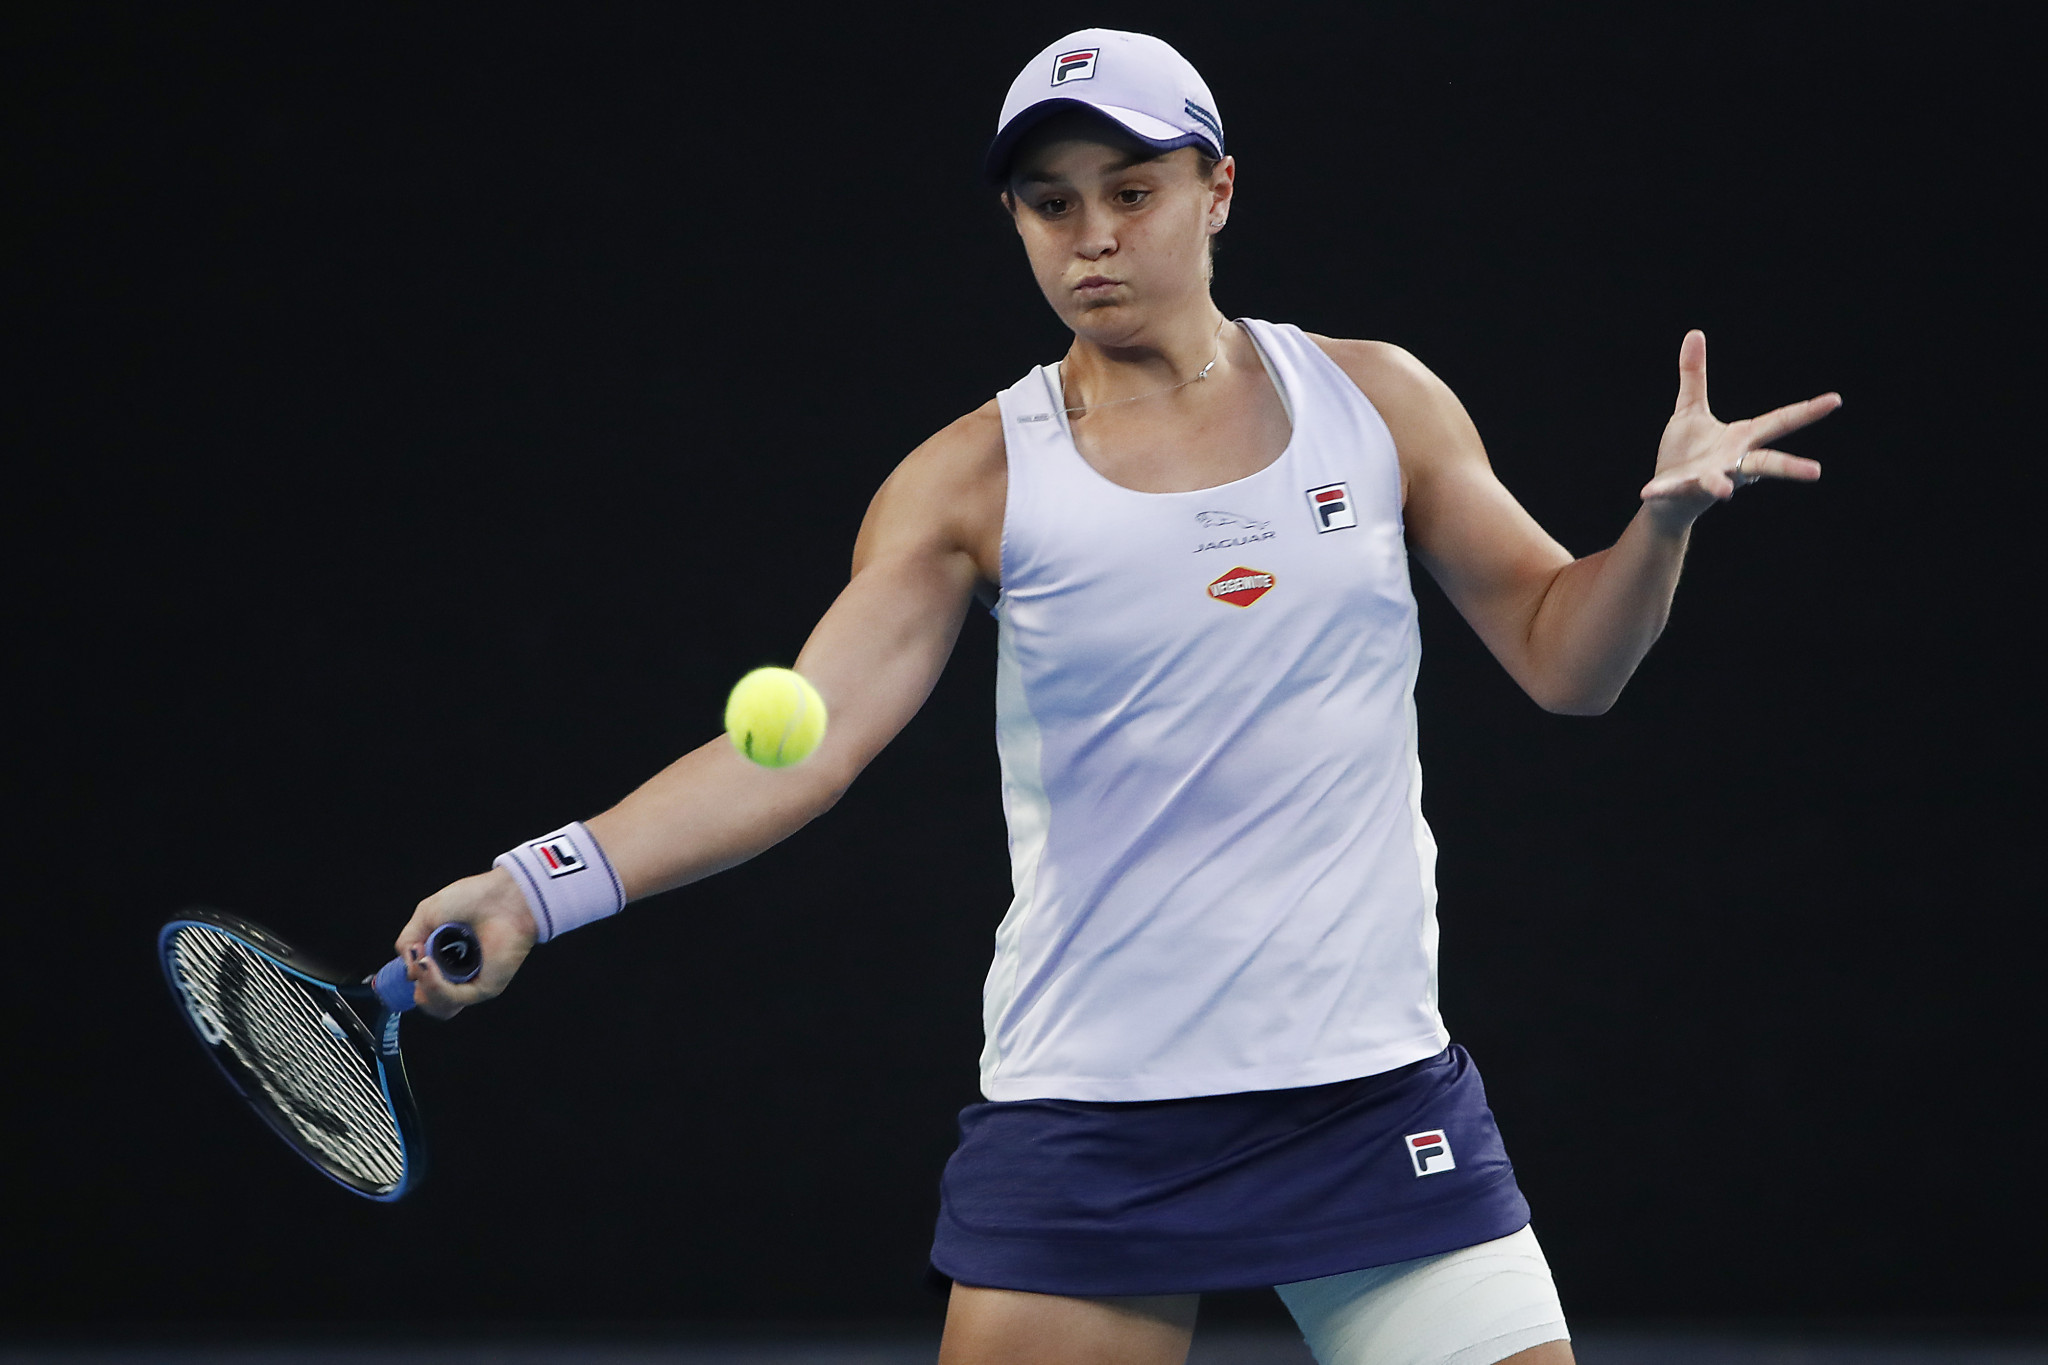 World number one Barty eases into quarter-finals of Australian Open